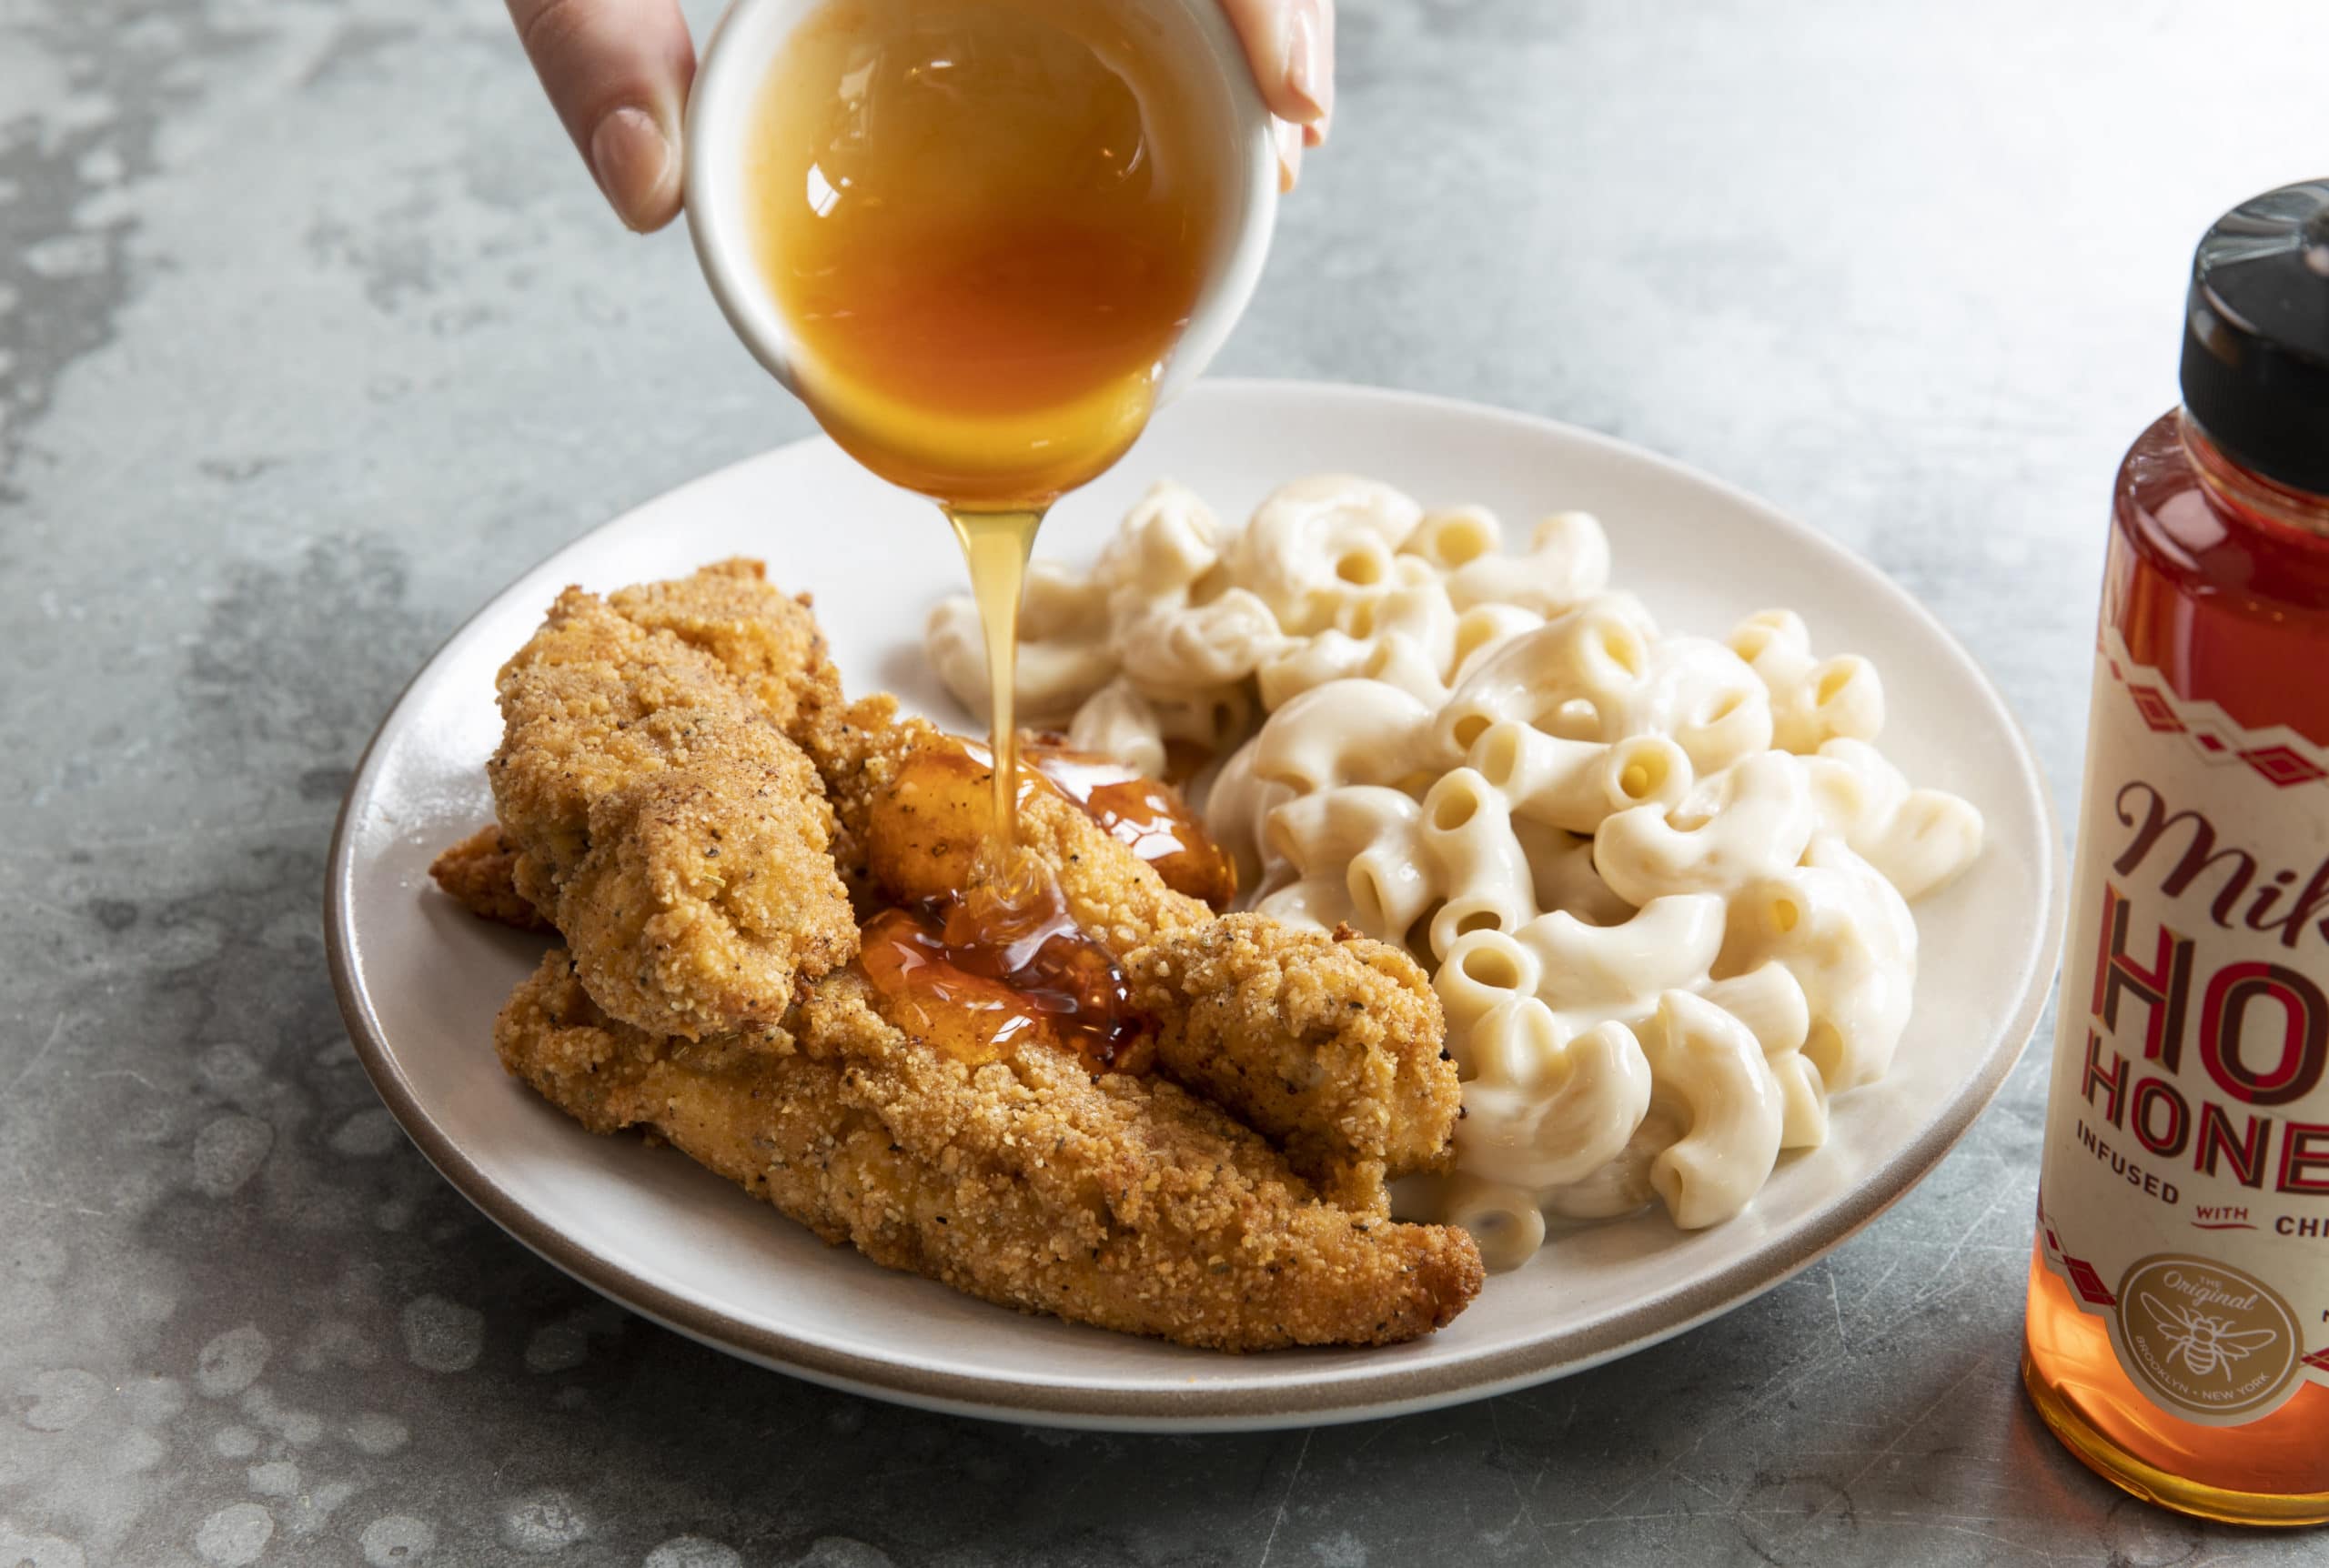 Hot honey being poured over breaded chicken on a plate with mac and cheese on the side